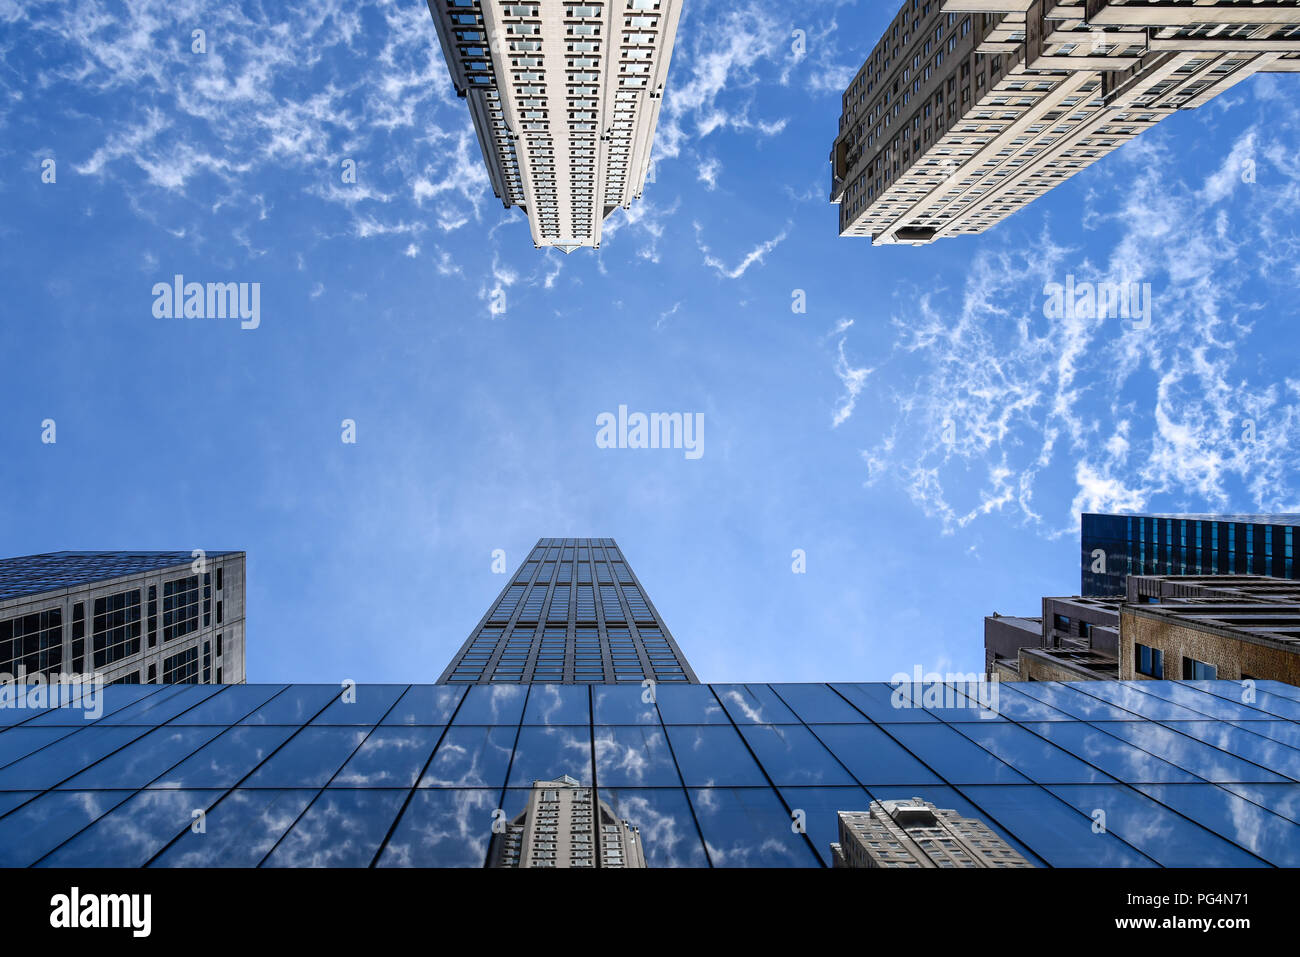 New York City, USA - June 21, 2018: Low angle view of 432 Park Avenue building and other skyscrapers against blue sky Stock Photo